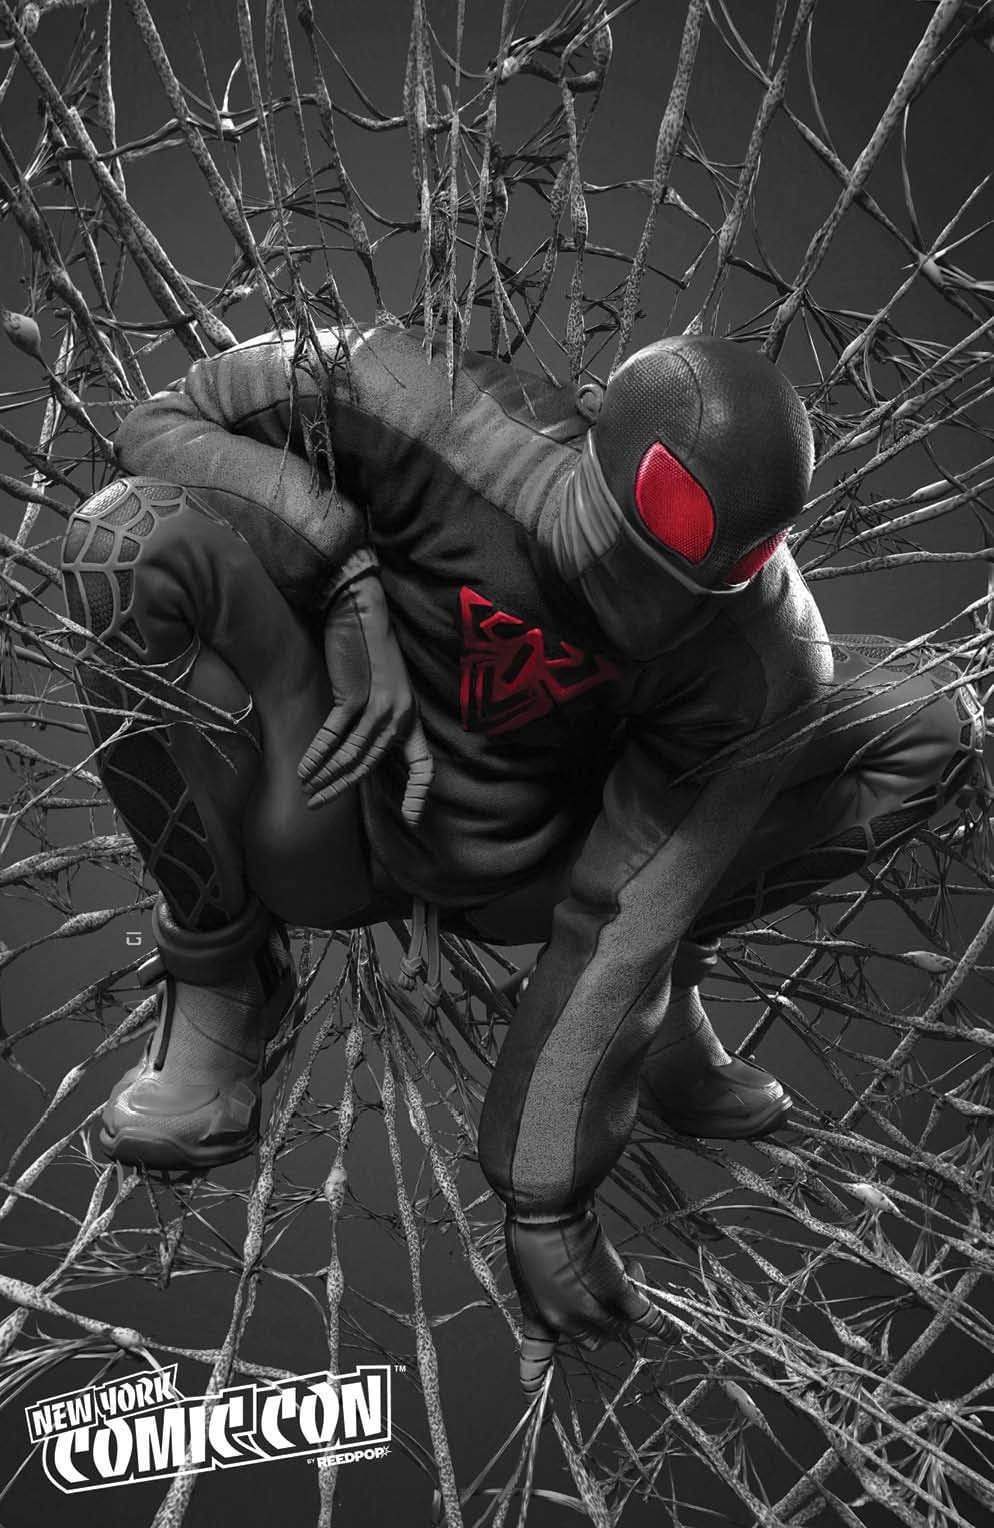 REVISIT MARVEL'S SPIDER-MAN: MILES MORALES IN AN ALL-NEW POSTER COLLECTION  FEATURING ART FROM THE G :: Blog :: Dark Horse Comics